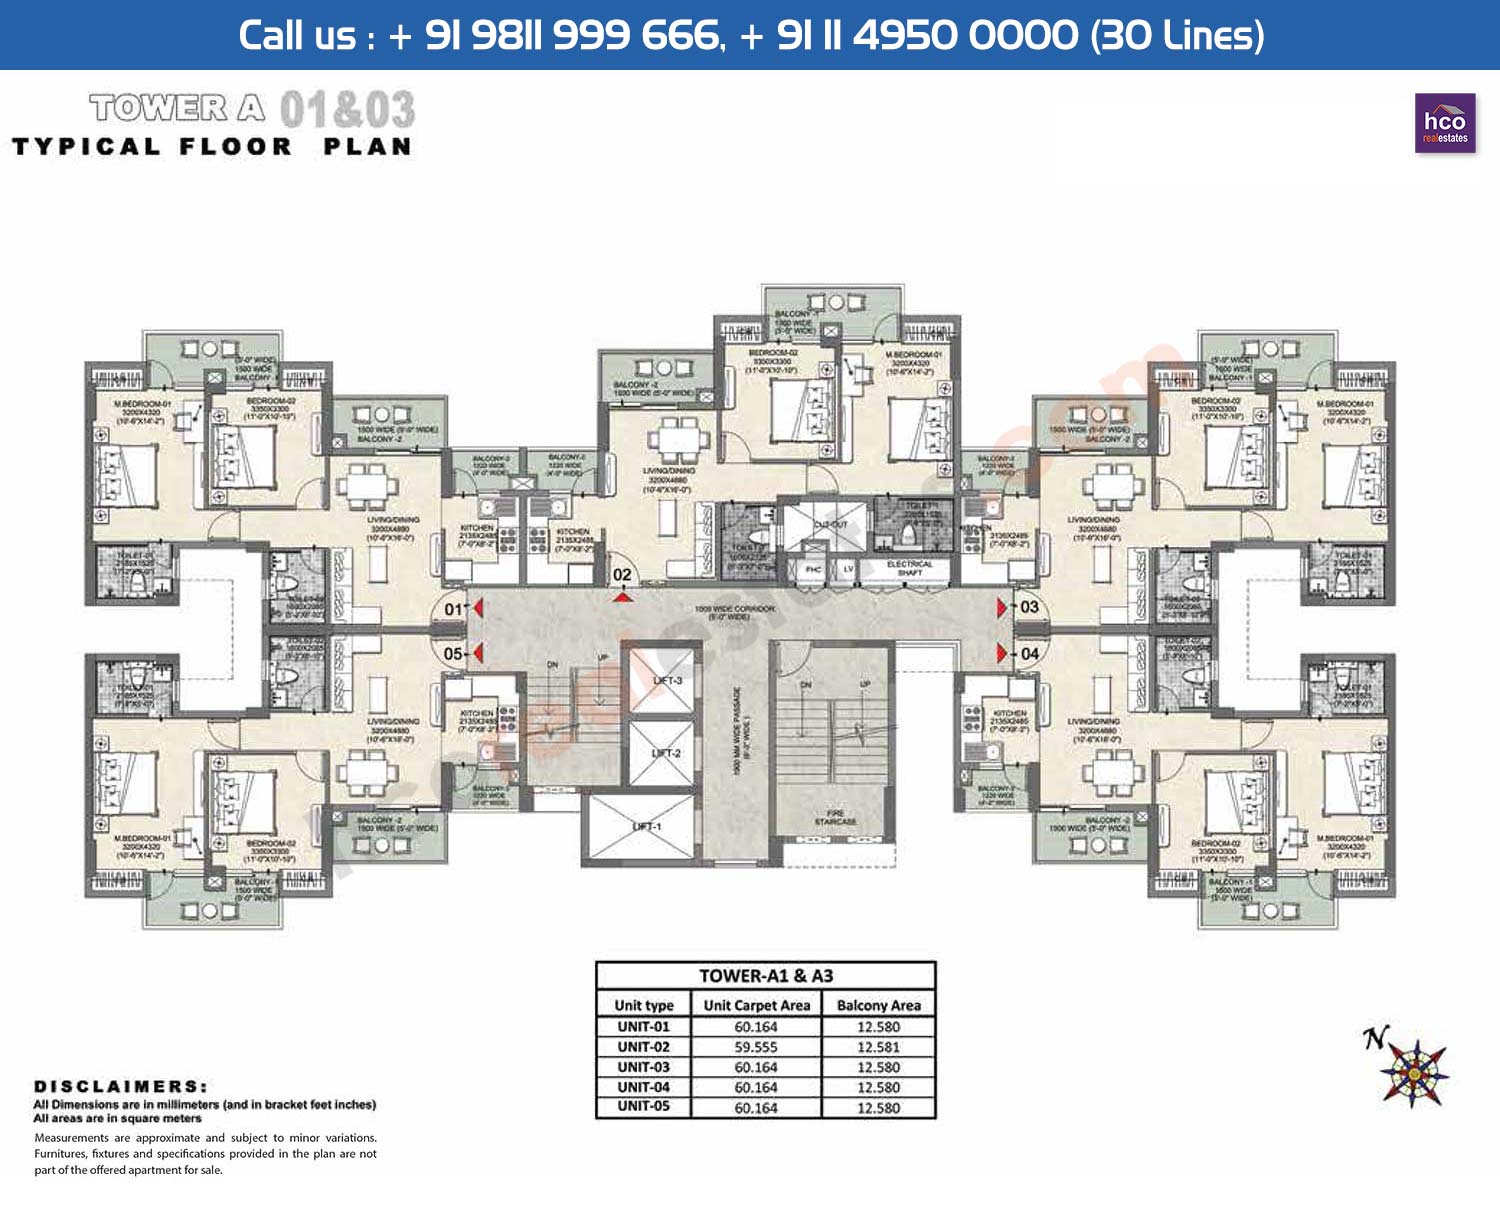 Tower A1 A3 Typical Floor Plan